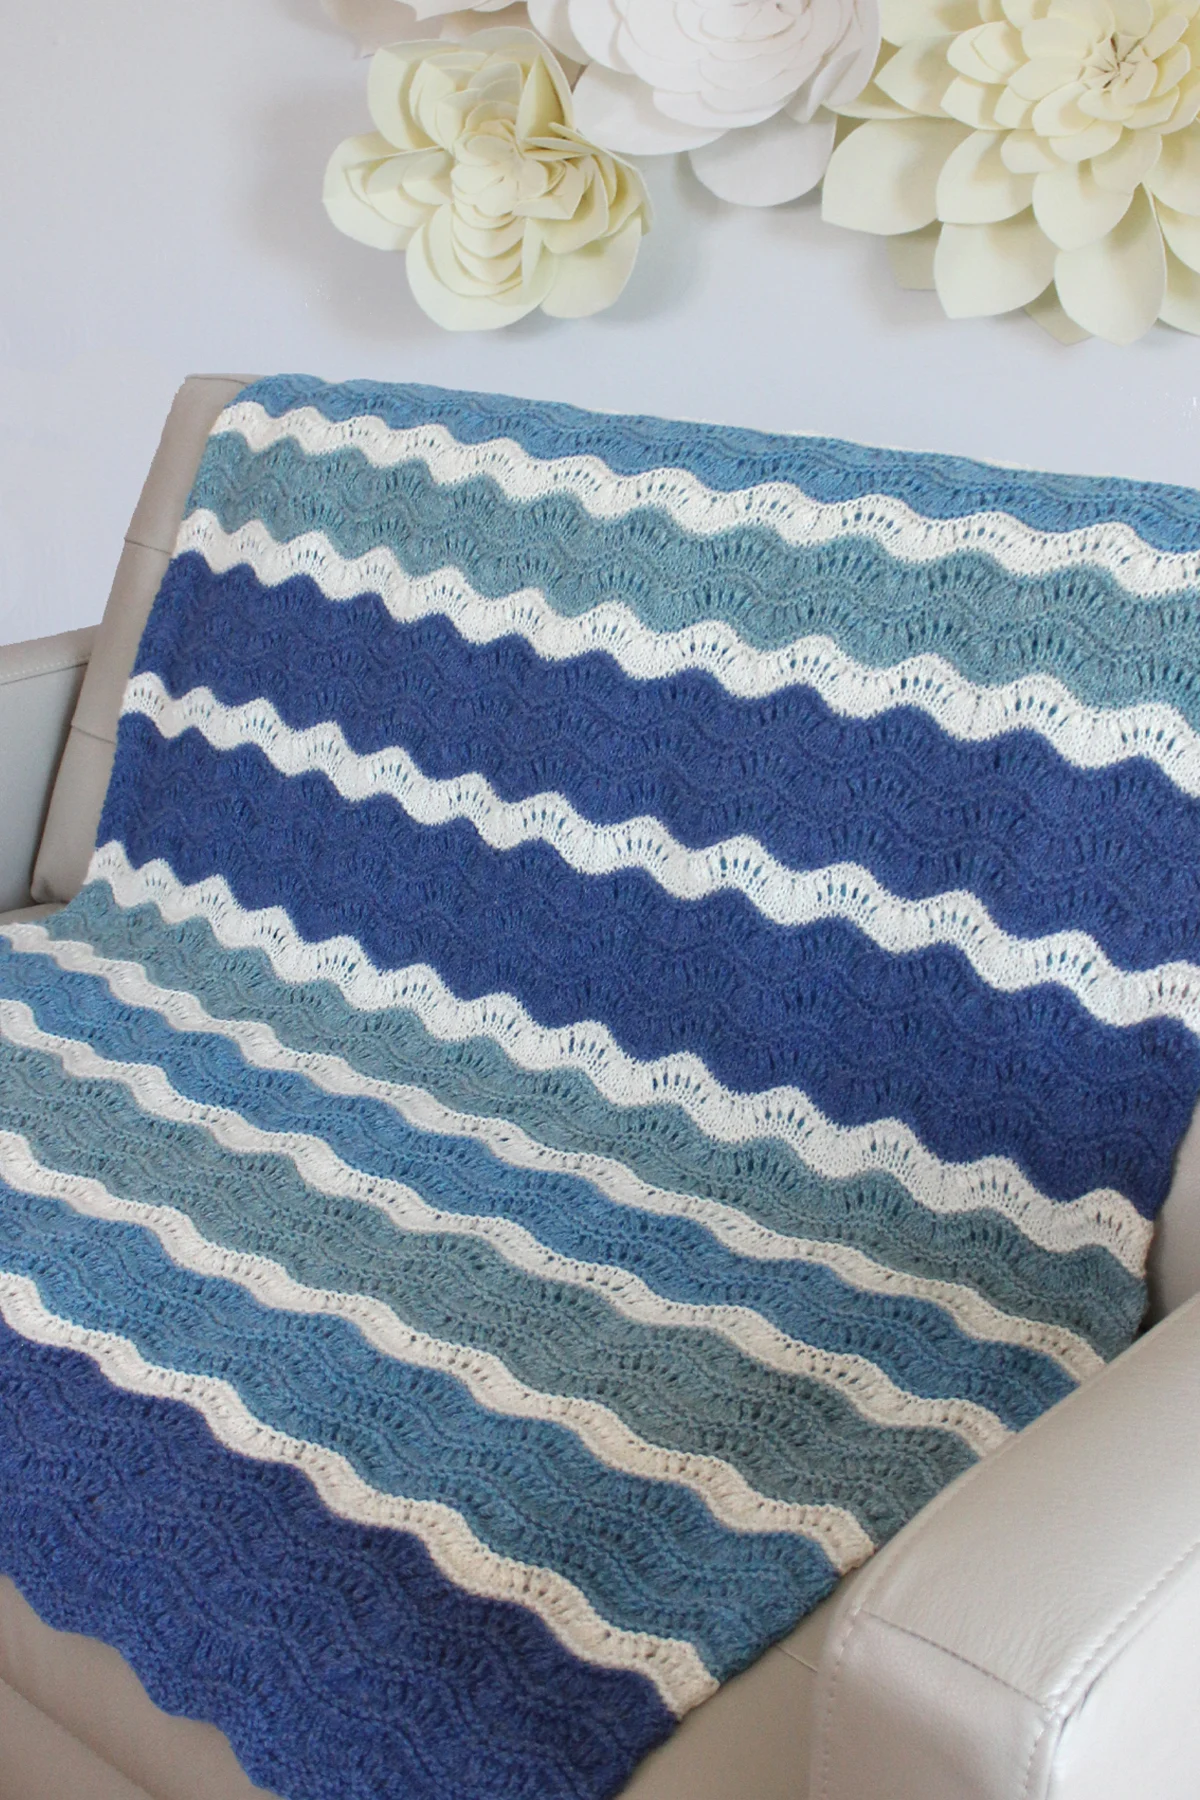 Mavericks Wave Blanket knitted in shades of blue and white displayed on a beige leather couch with white felt flowers on the wall.